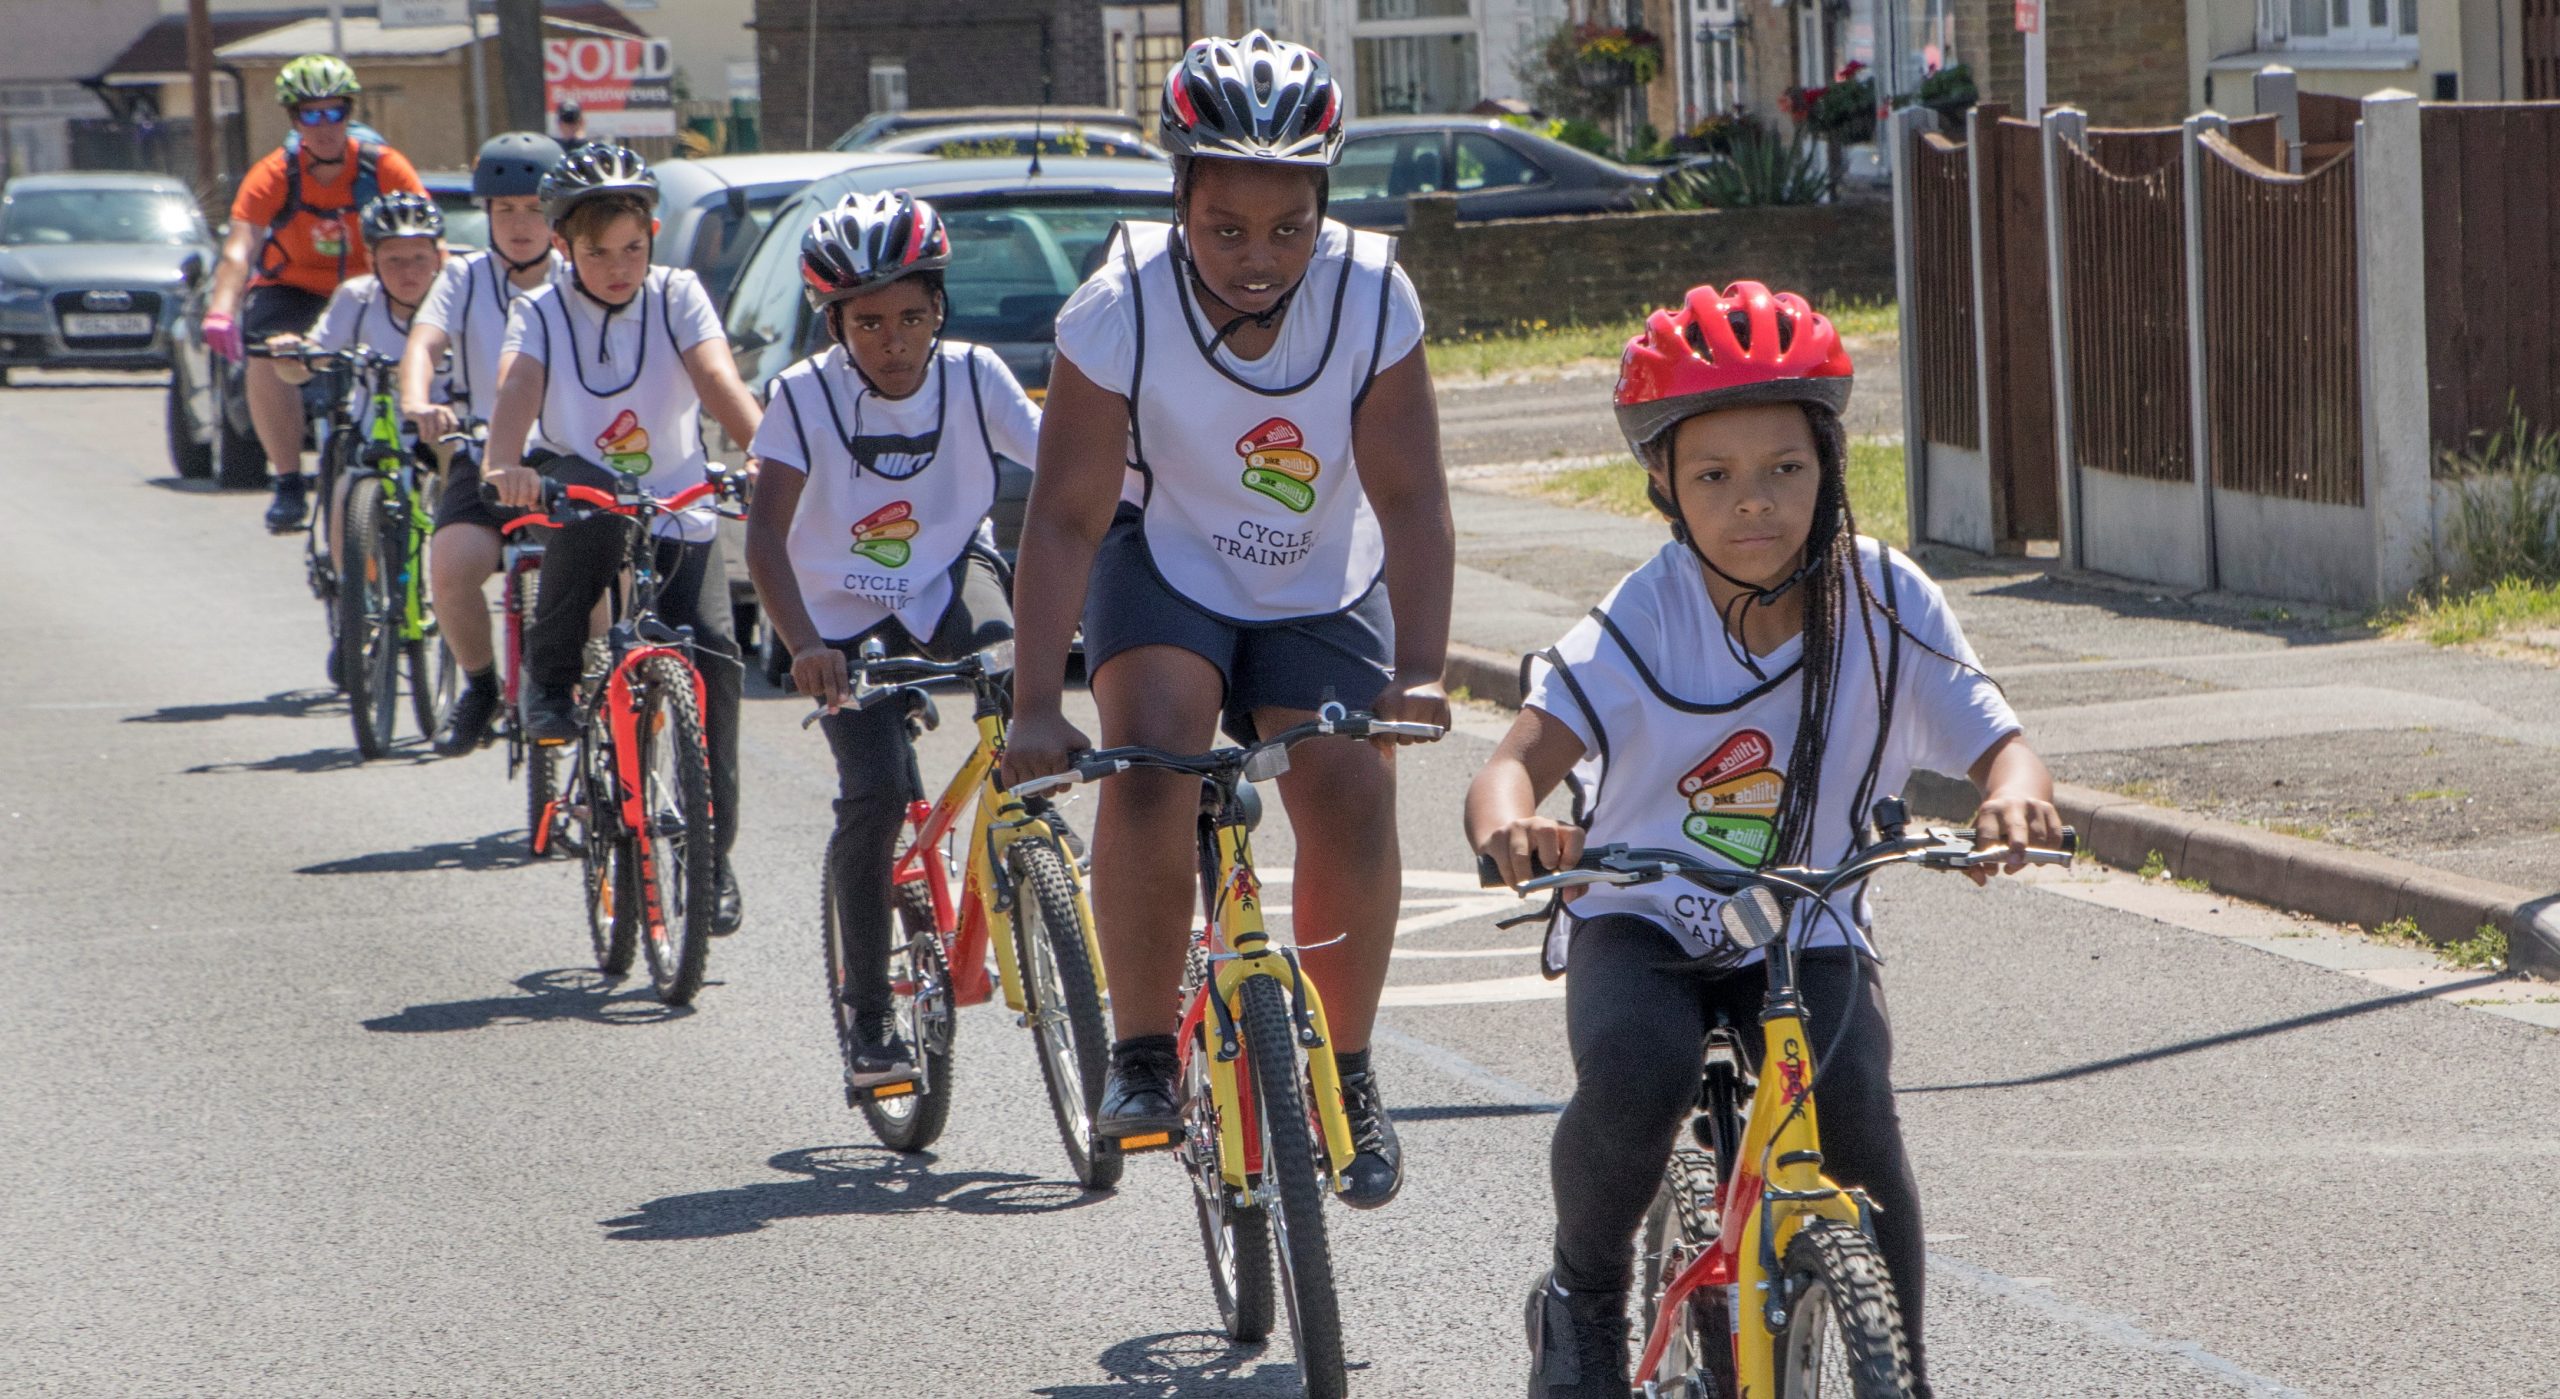 A group of children cycle in a line on the road during a Bikeability session.